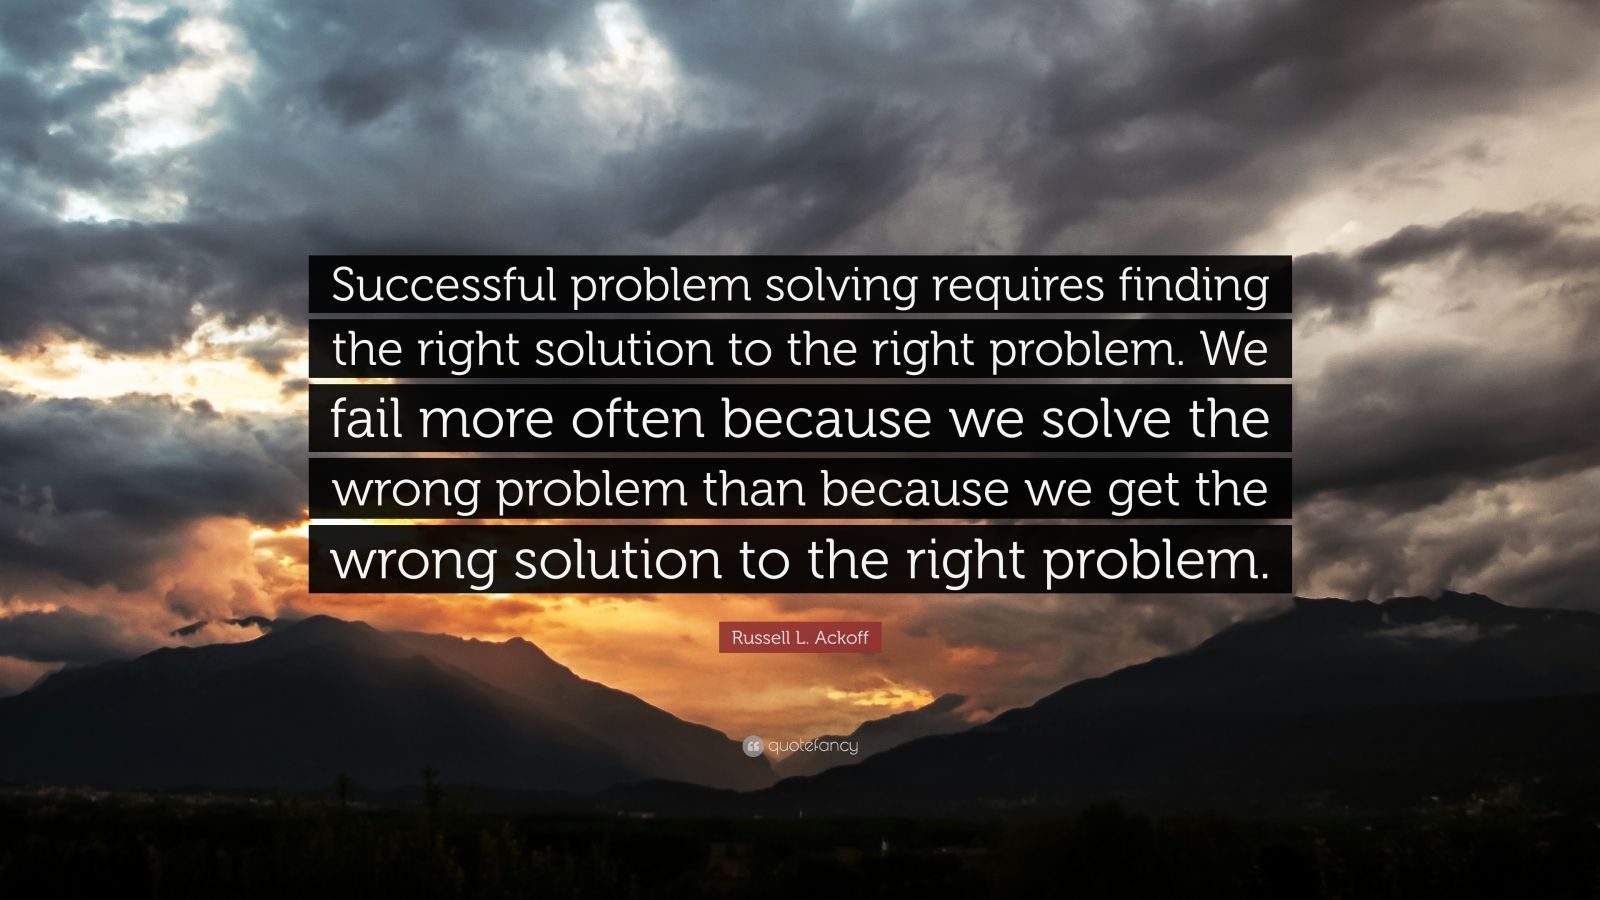 Russell L. Ackoff Quote: “Successful problem solving requires finding ...